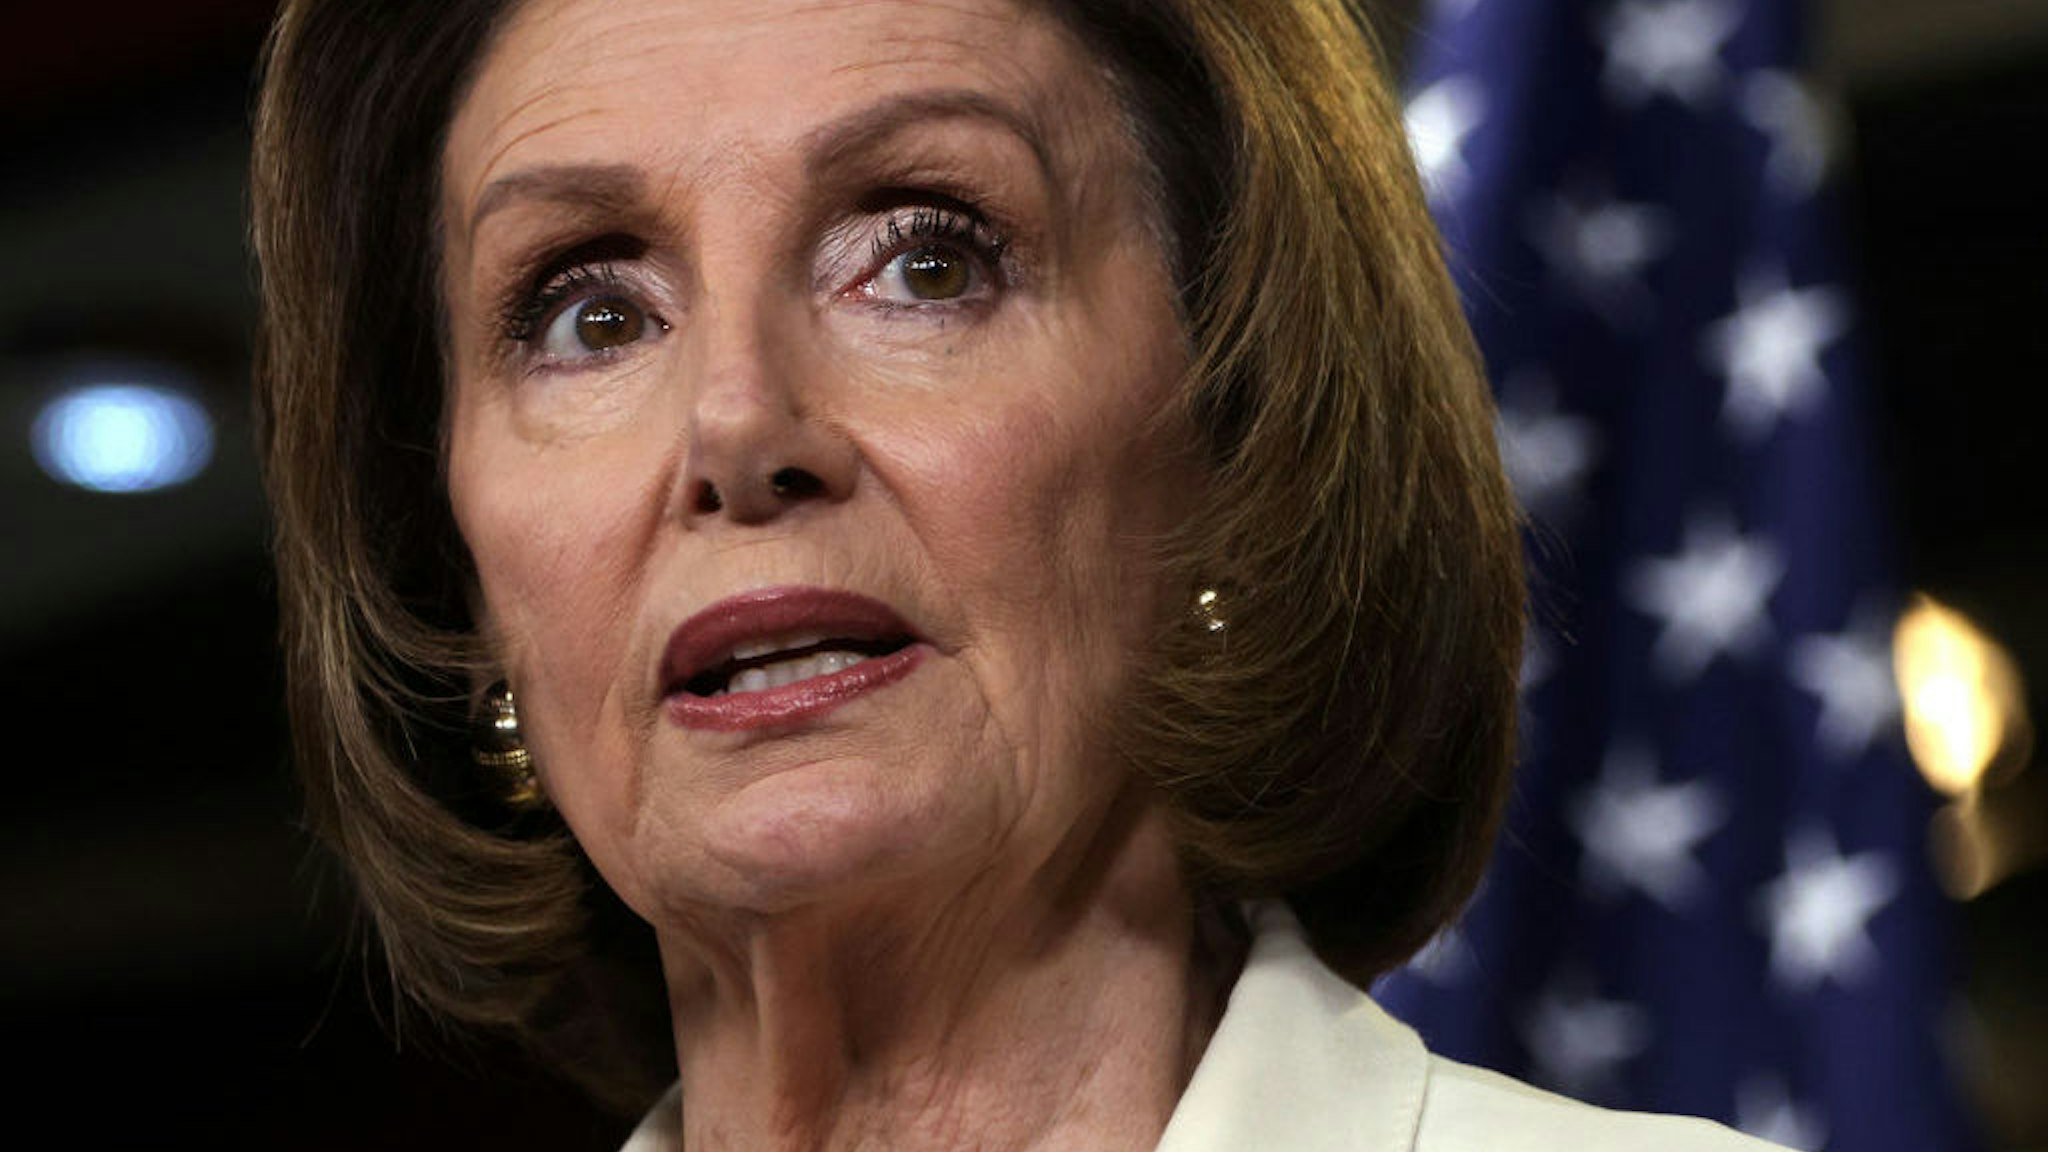 WASHINGTON, DC - JUNE 24: U.S. Speaker of the House Rep. Nancy Pelosi (D-CA) speaks during a weekly news conference at the U.S. Capitol June 24, 2021 in Washington, DC. Speaker Pelosi announced that she is forming a select committee to investigate the January 6, 2021 Capitol riot. (Photo by Alex Wong/Getty Images)